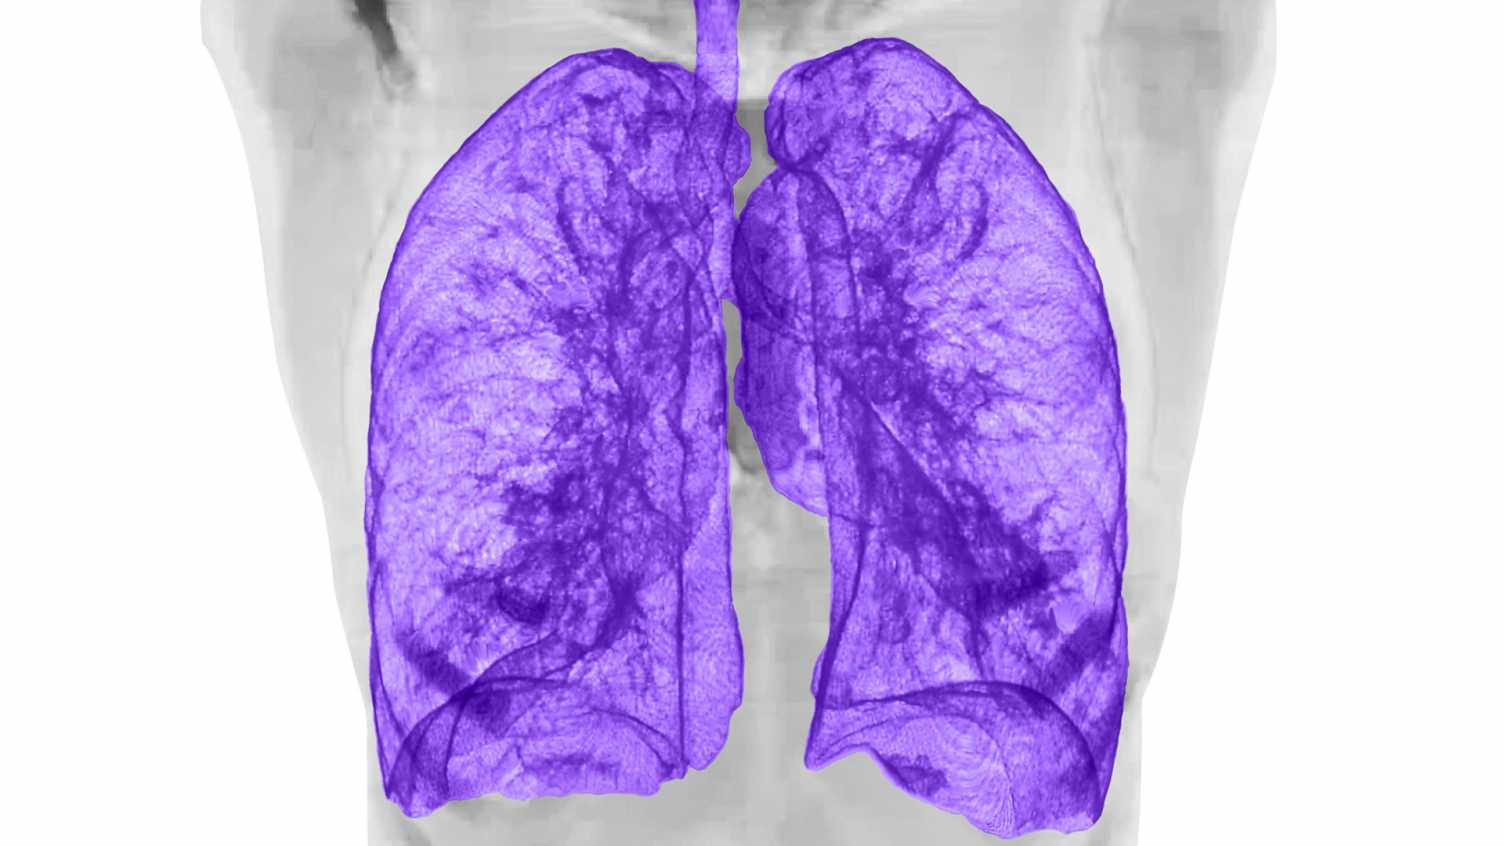 New MRI scanning technology to improve clinical accessibility and advance lung disease diagnosis | News